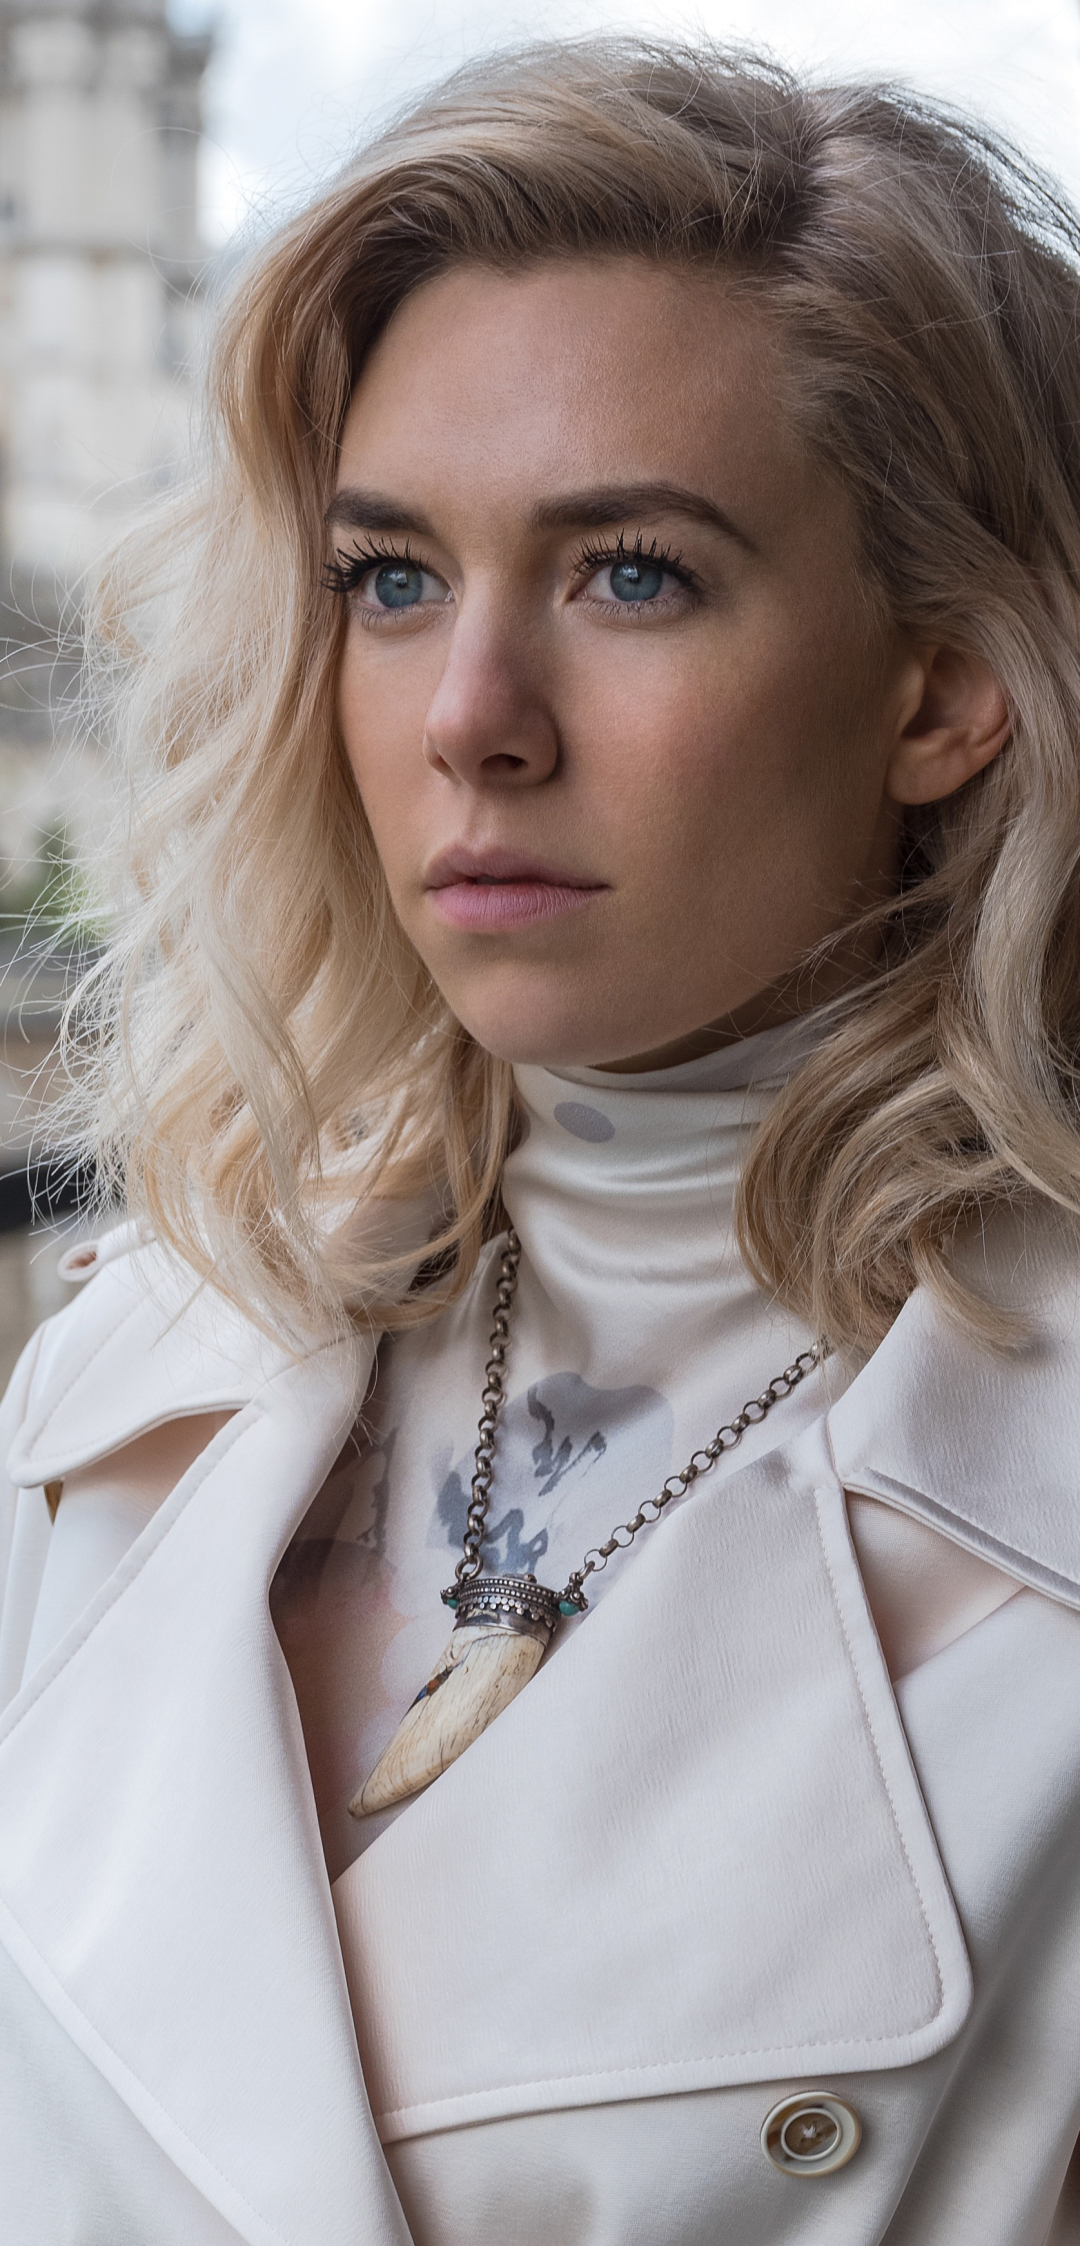 Vanessa Kirby in Mission: Impossible - Fallout